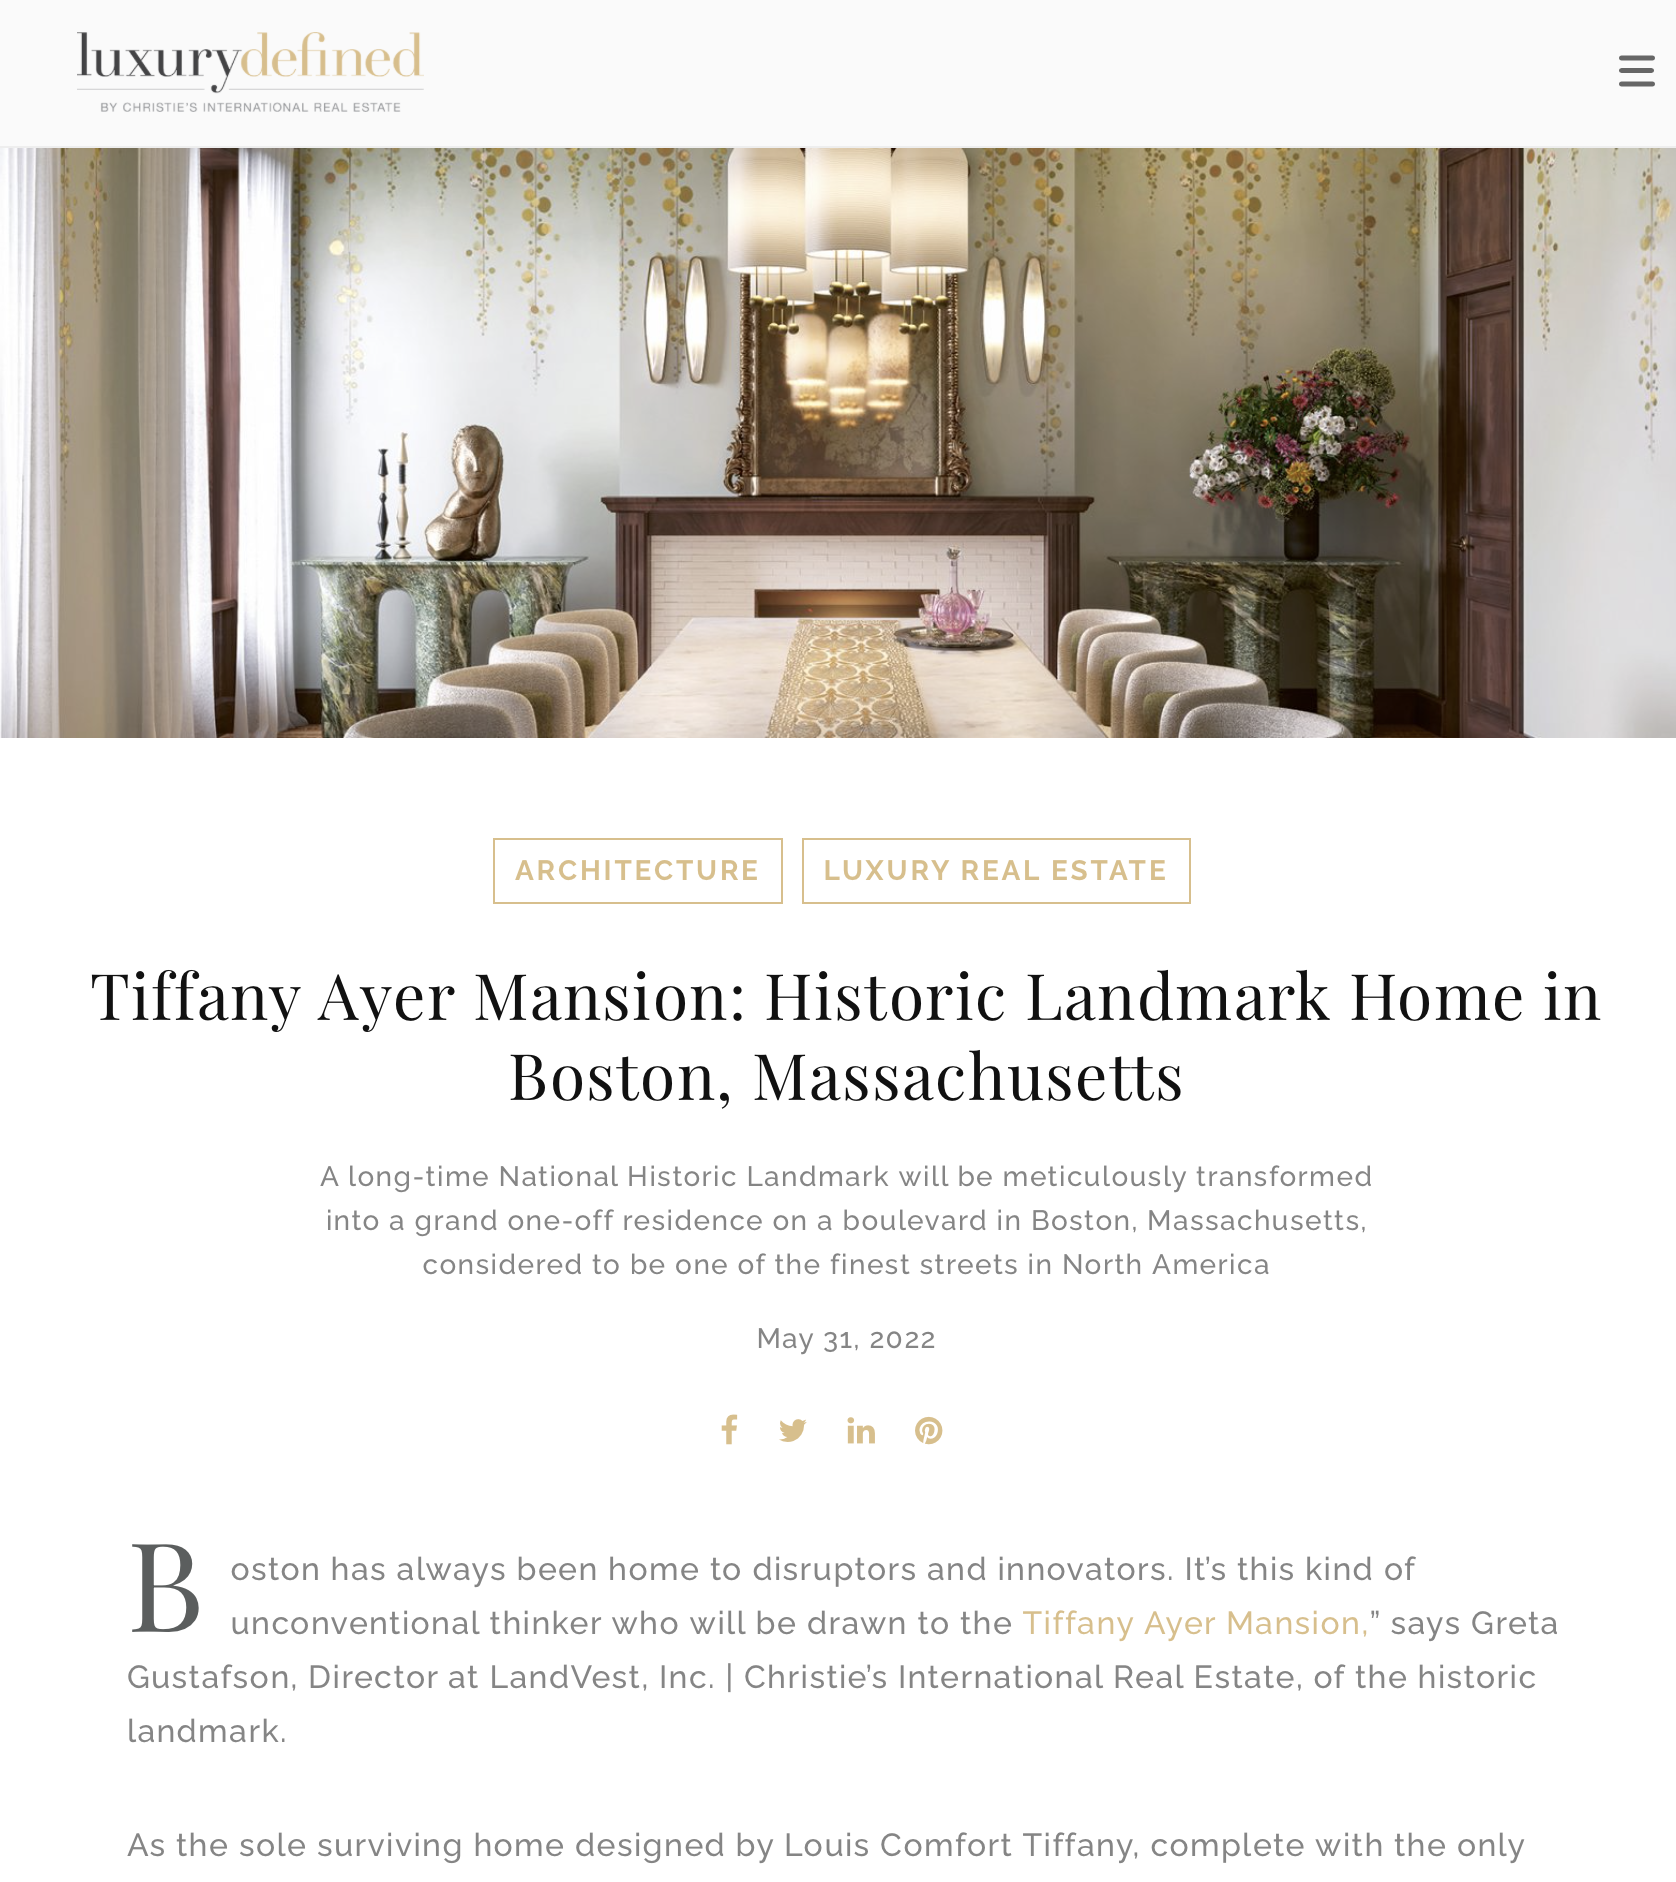 Tiffany Ayer Mansion for CIRE